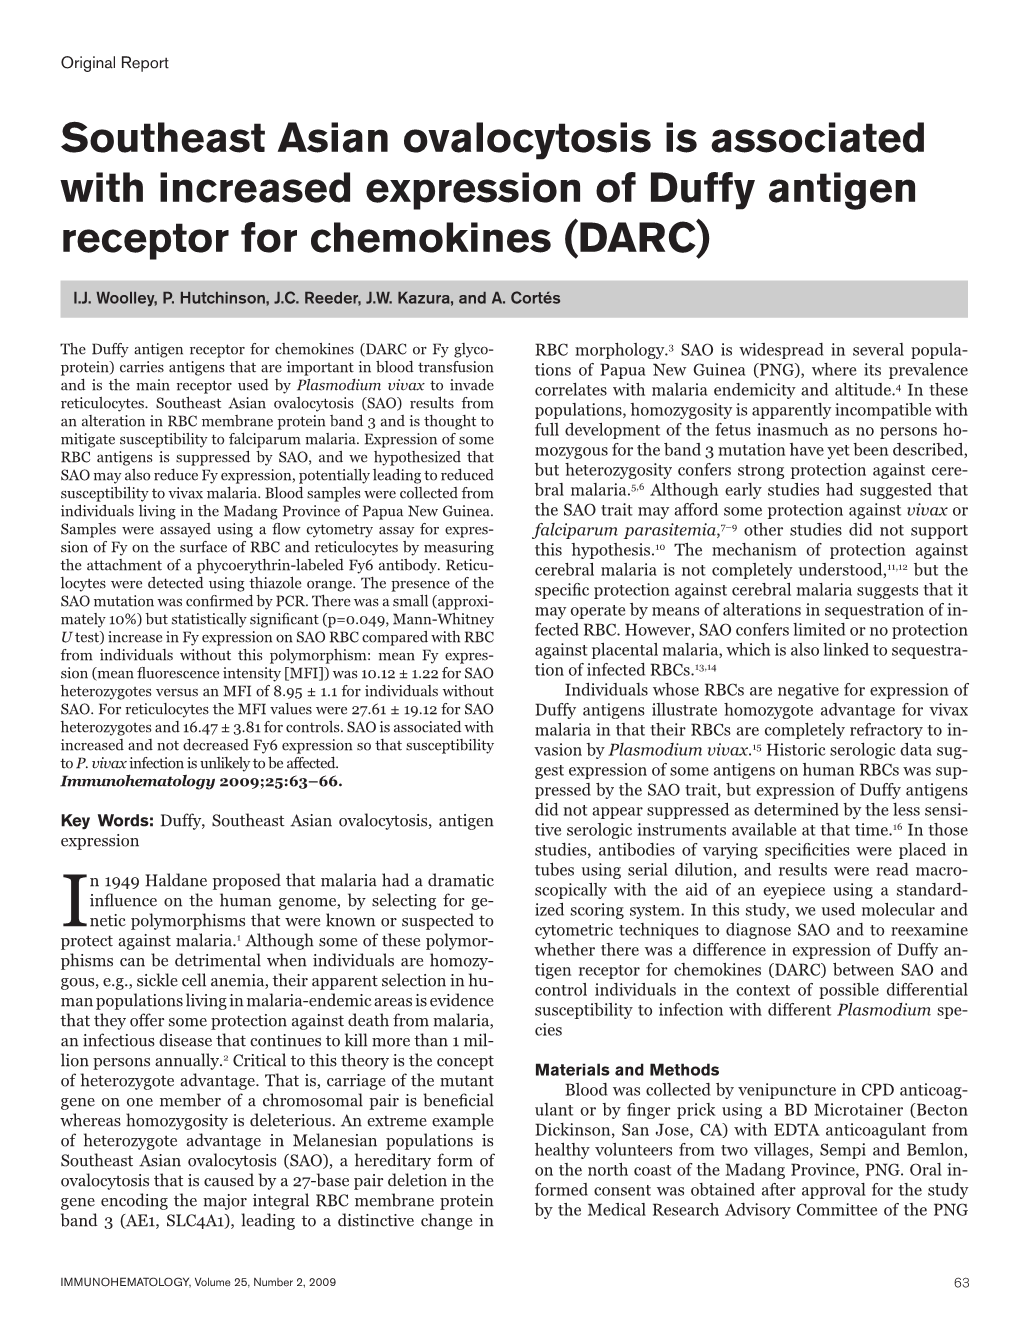 Southeast Asian Ovalocytosis Is Associated with Increased Expression of Duffy Antigen Receptor for Chemokines (DARC)